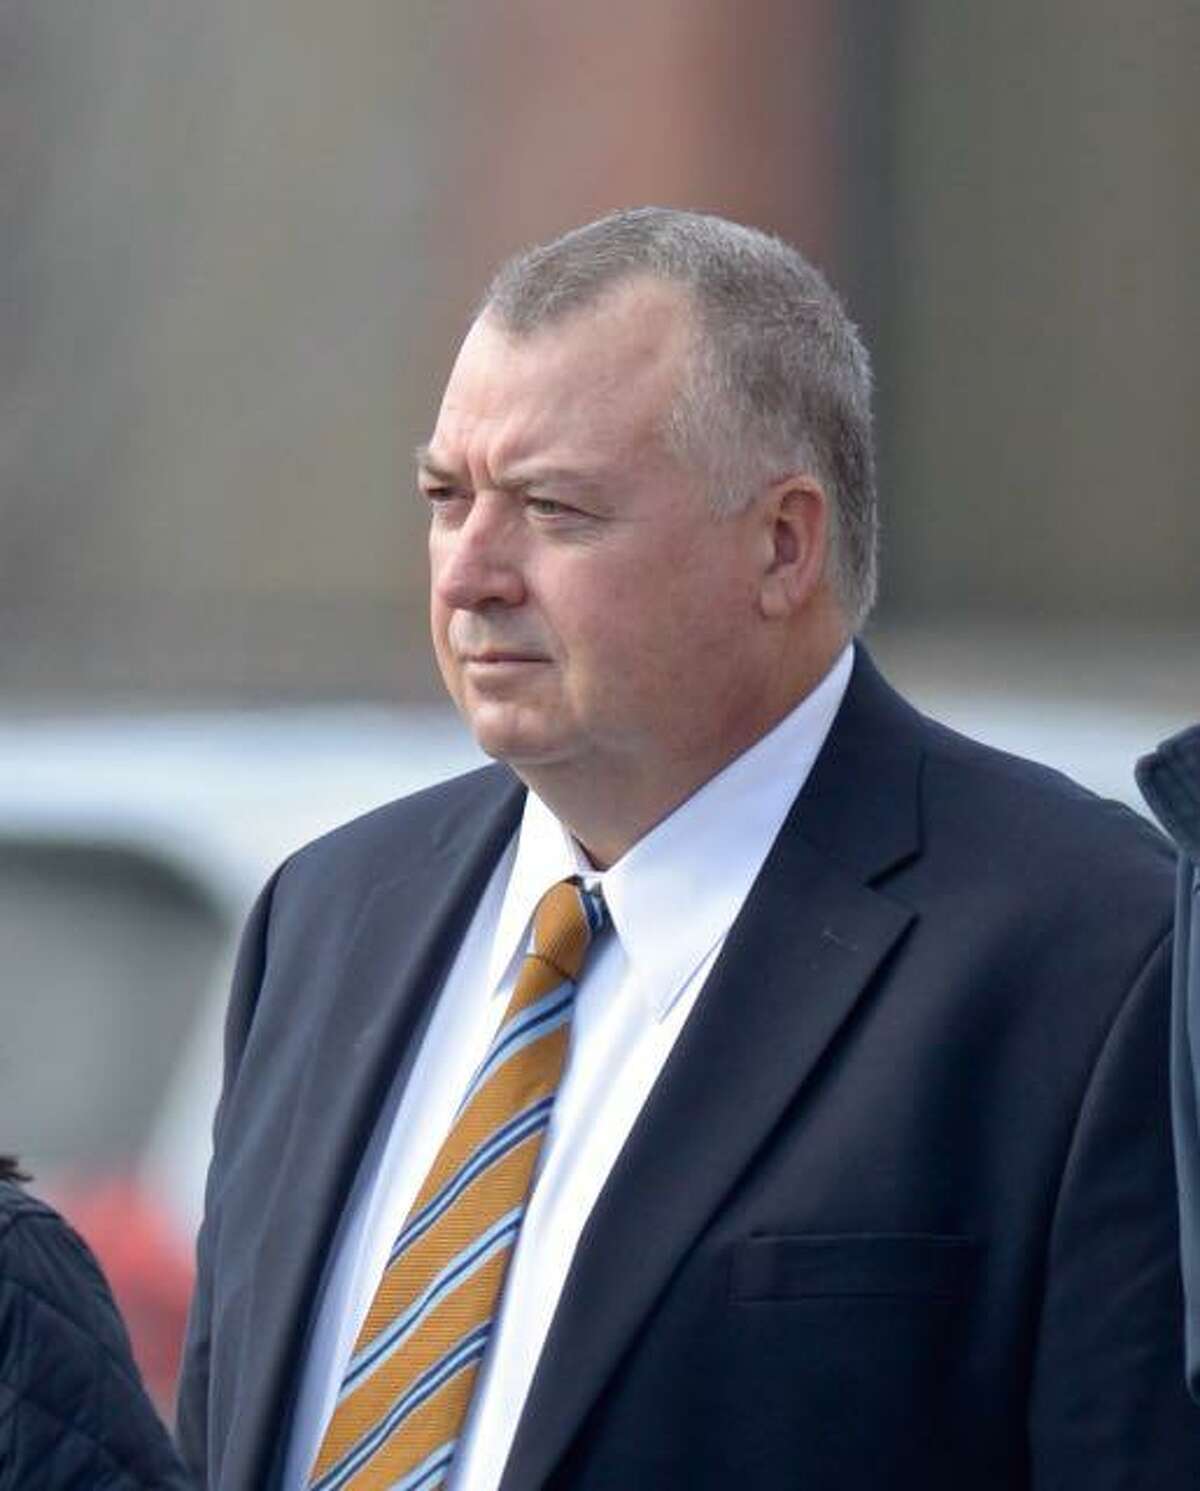 Former New Milford CIO Kendrick Protzmann leaves the Litchfield Judicial District courthouse in Torrington on Friday morning January 24, 2020 in Torrington, Connecticut.